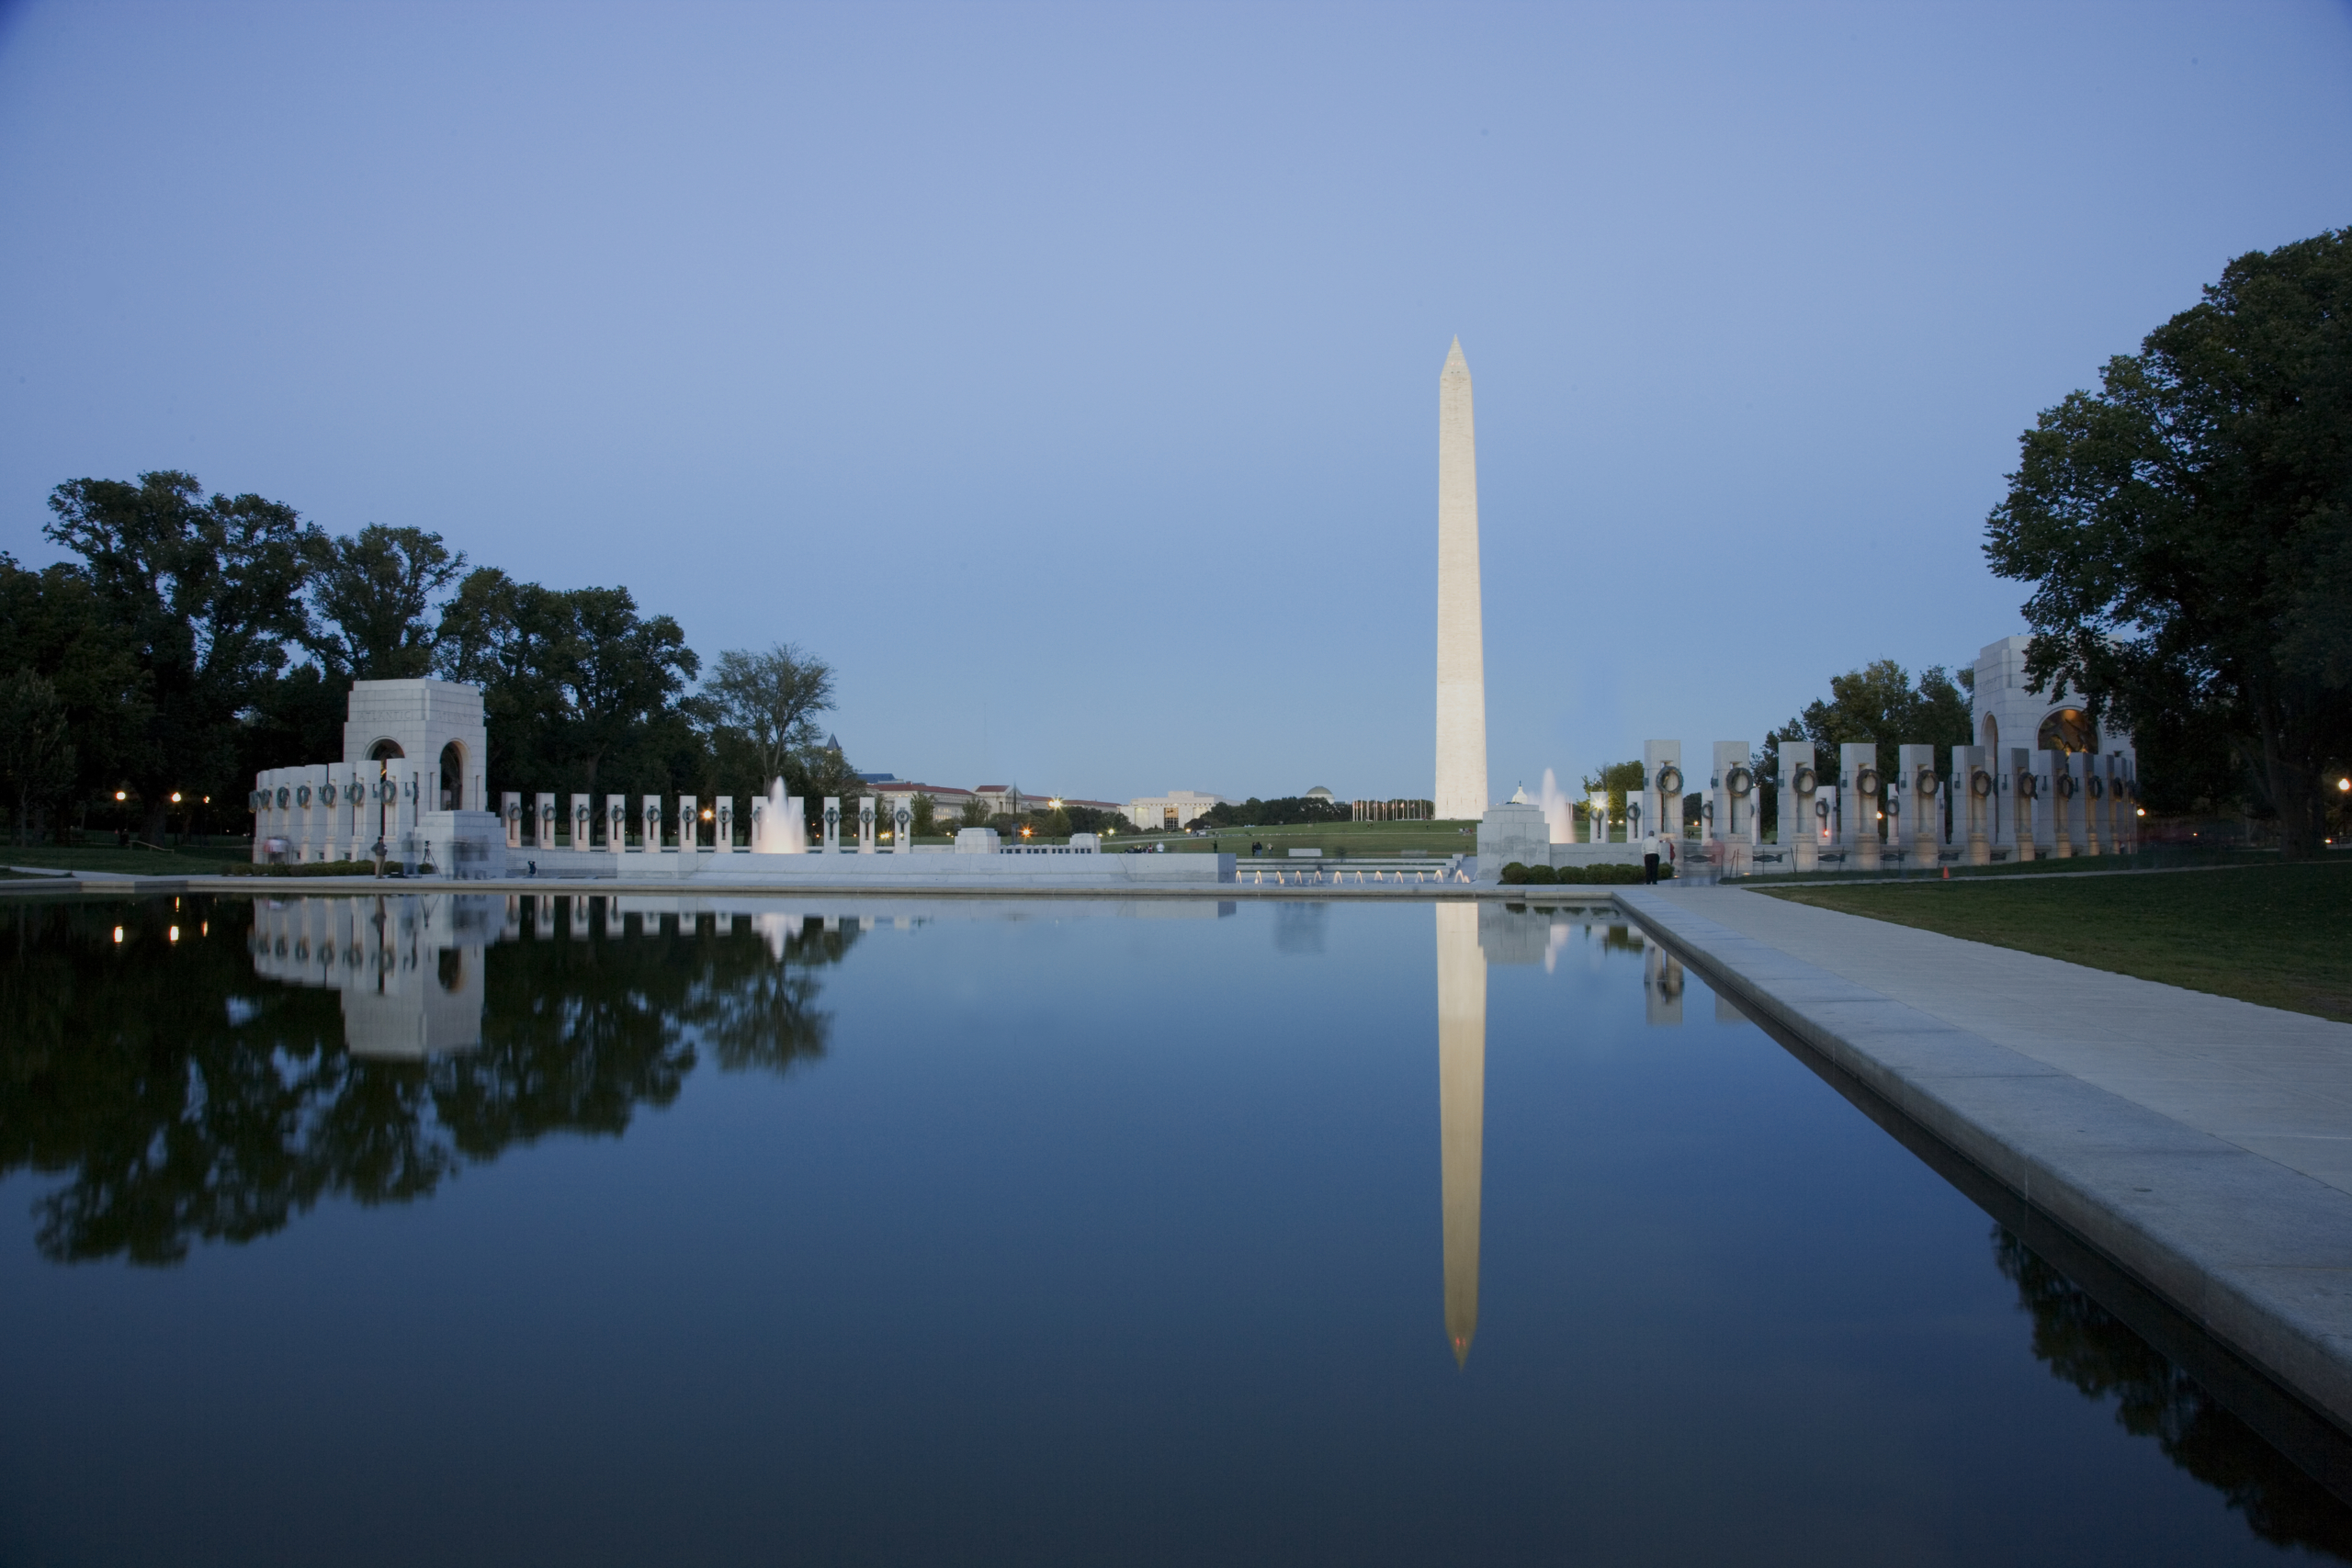 Reflecting Pool on the National Mall with the Washinton Monument.